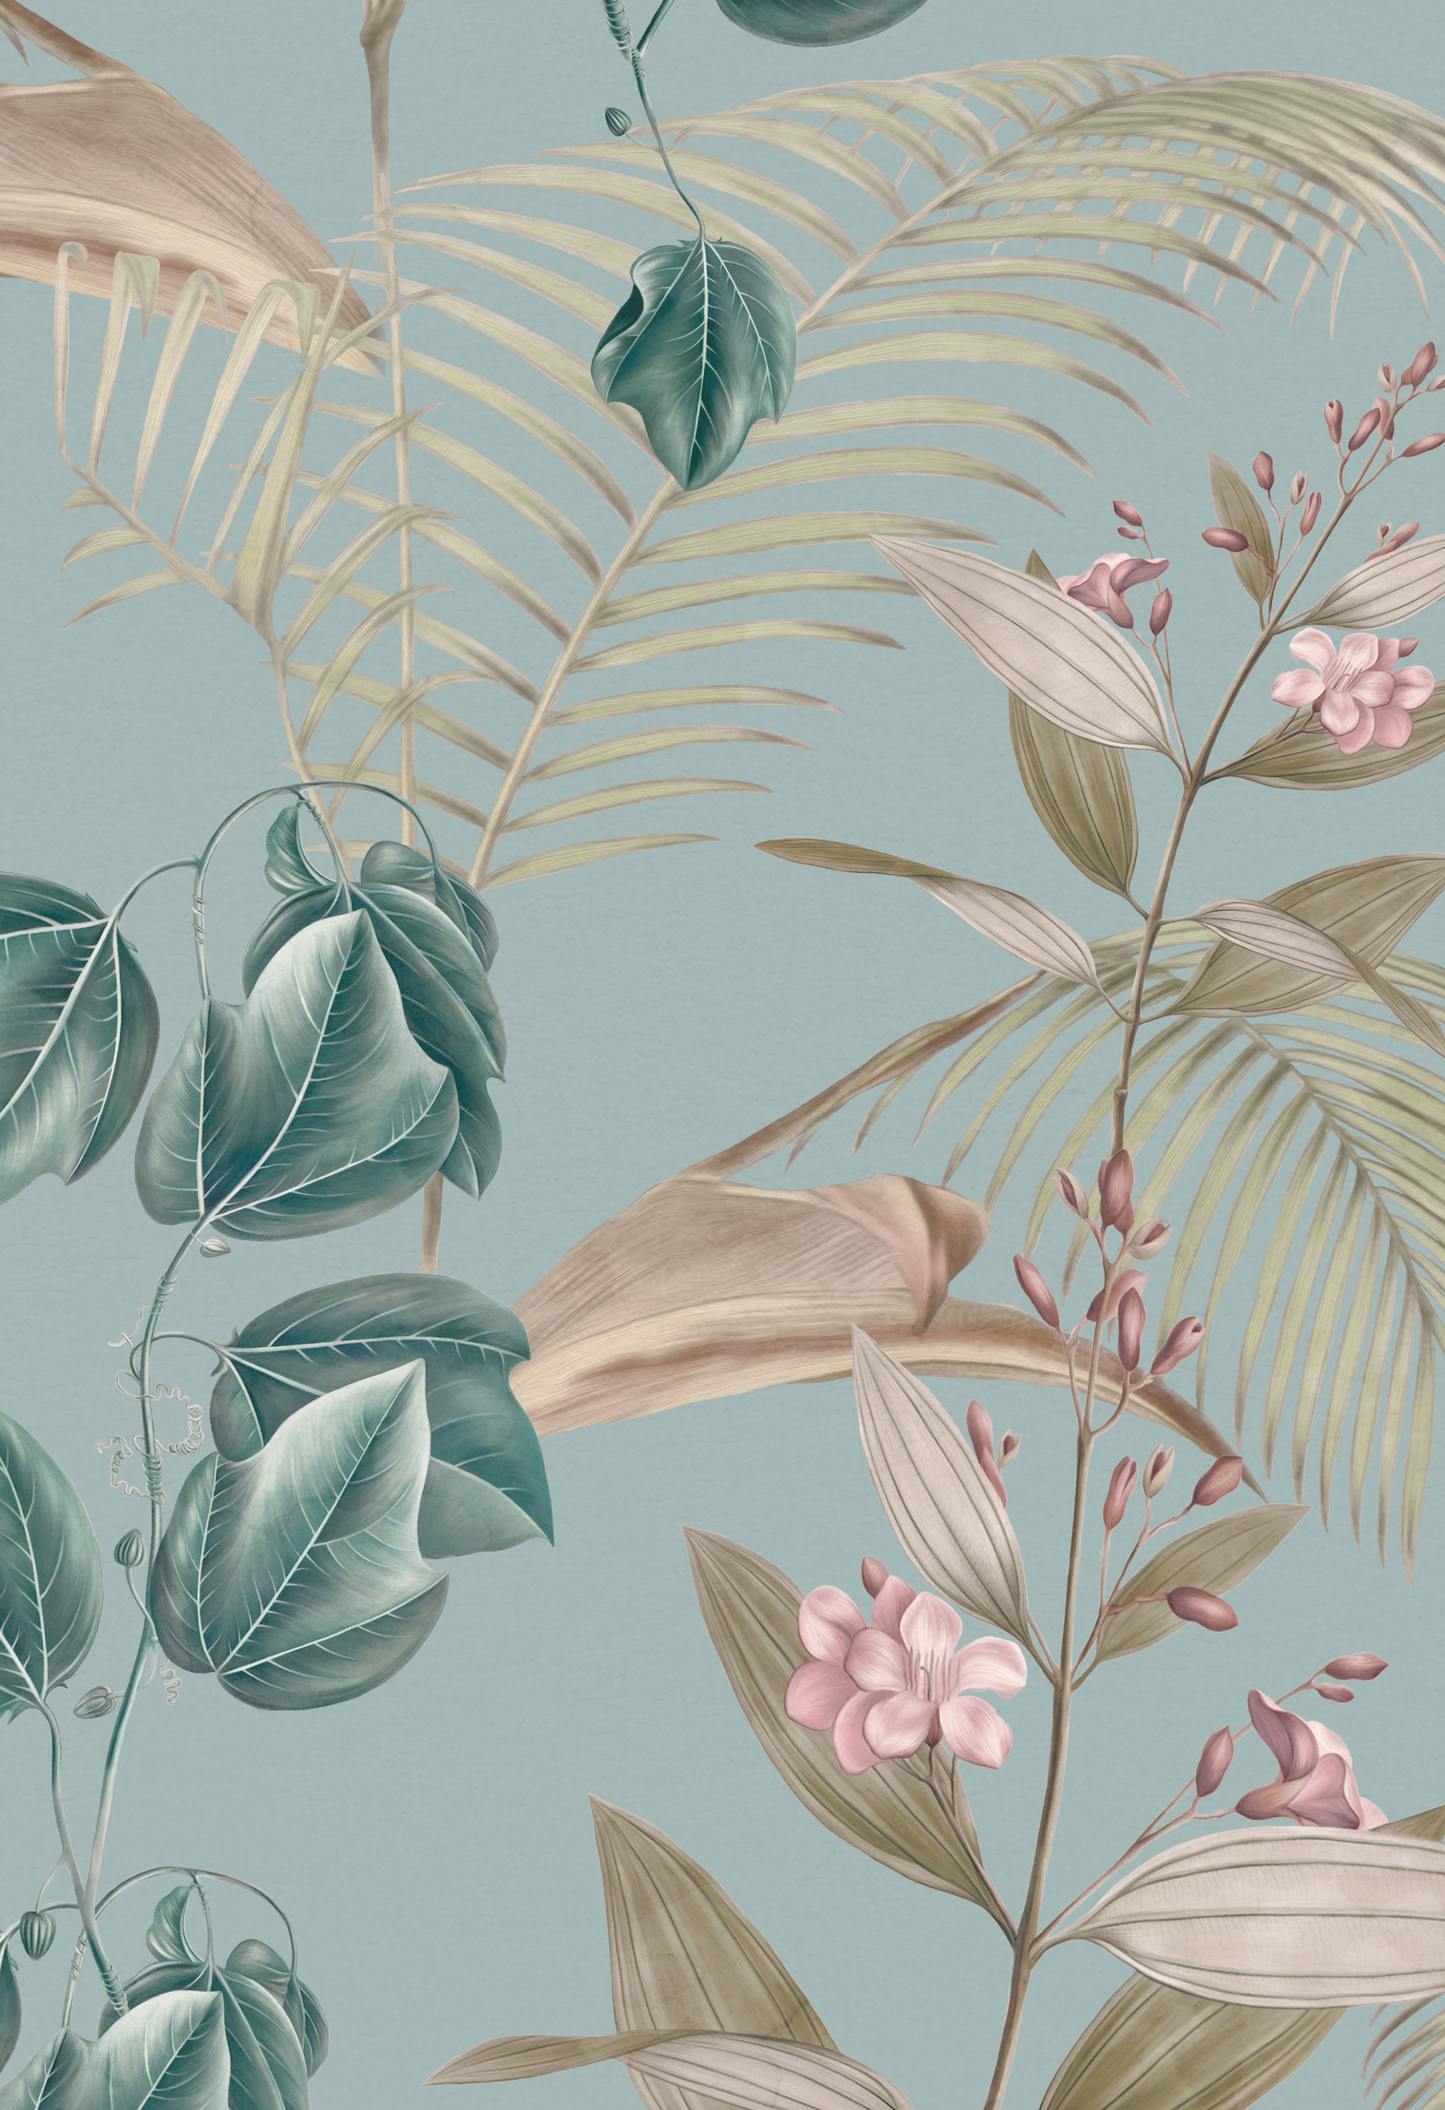 illustration of 'Wild Ivy' canopy with pint flowers and golden palms on blue background by Deus ex Gardenia's Wild Ivy Wallpaper in Horizon.